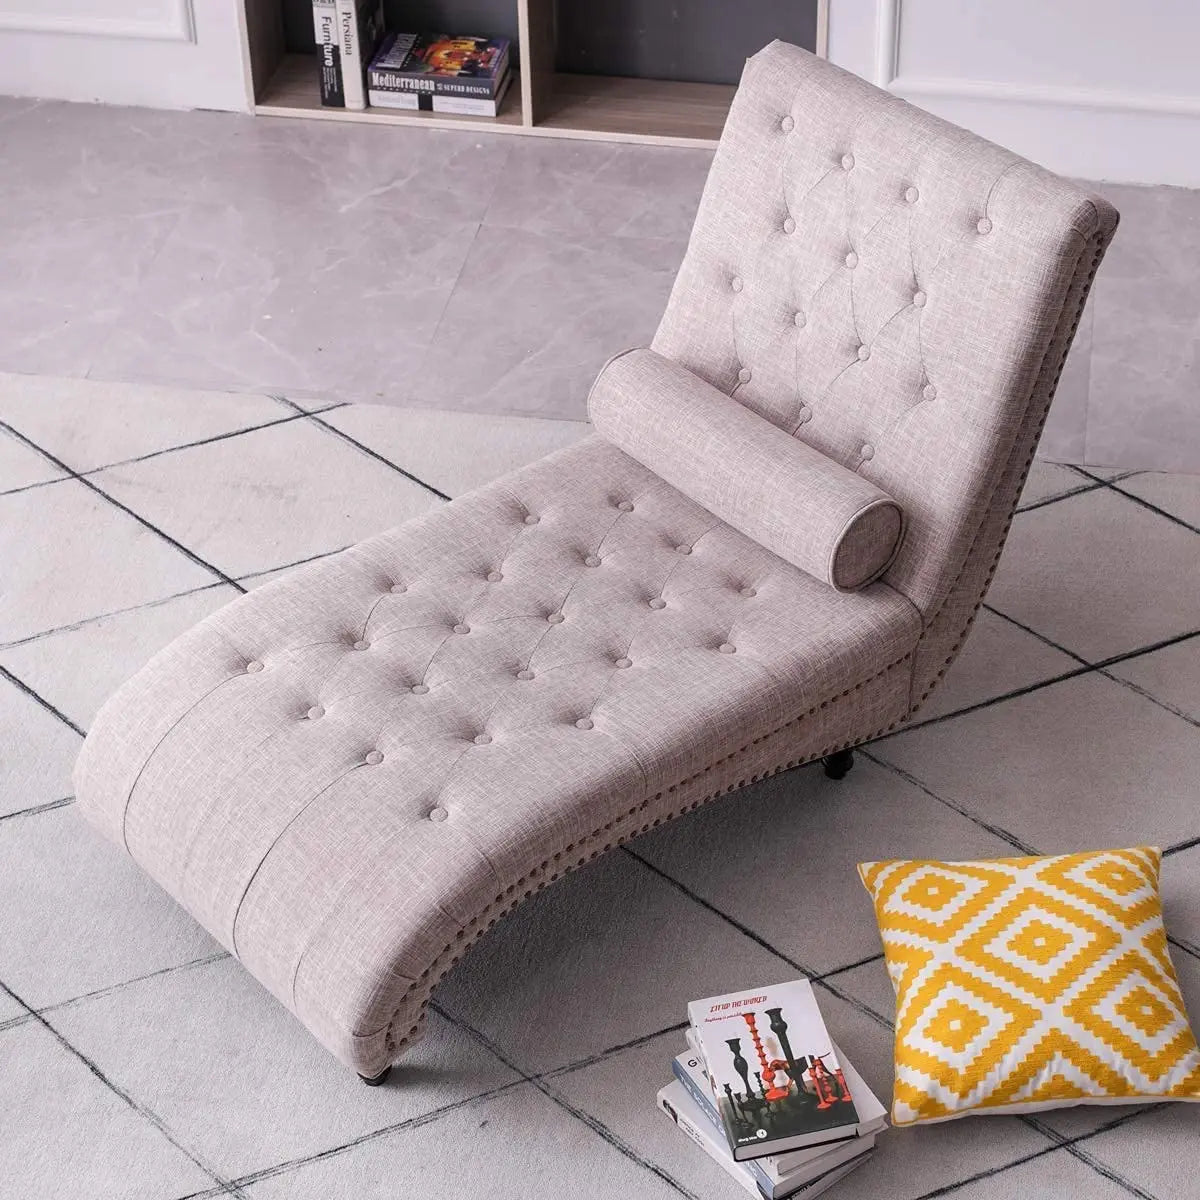 Couch Macer- Single Modern Sofa Bed Lounge Lazy Sofa Bed Chair Fabric Recliner Couch Wooden Legs for Home Living Room Bedroom Rest Room Furneez